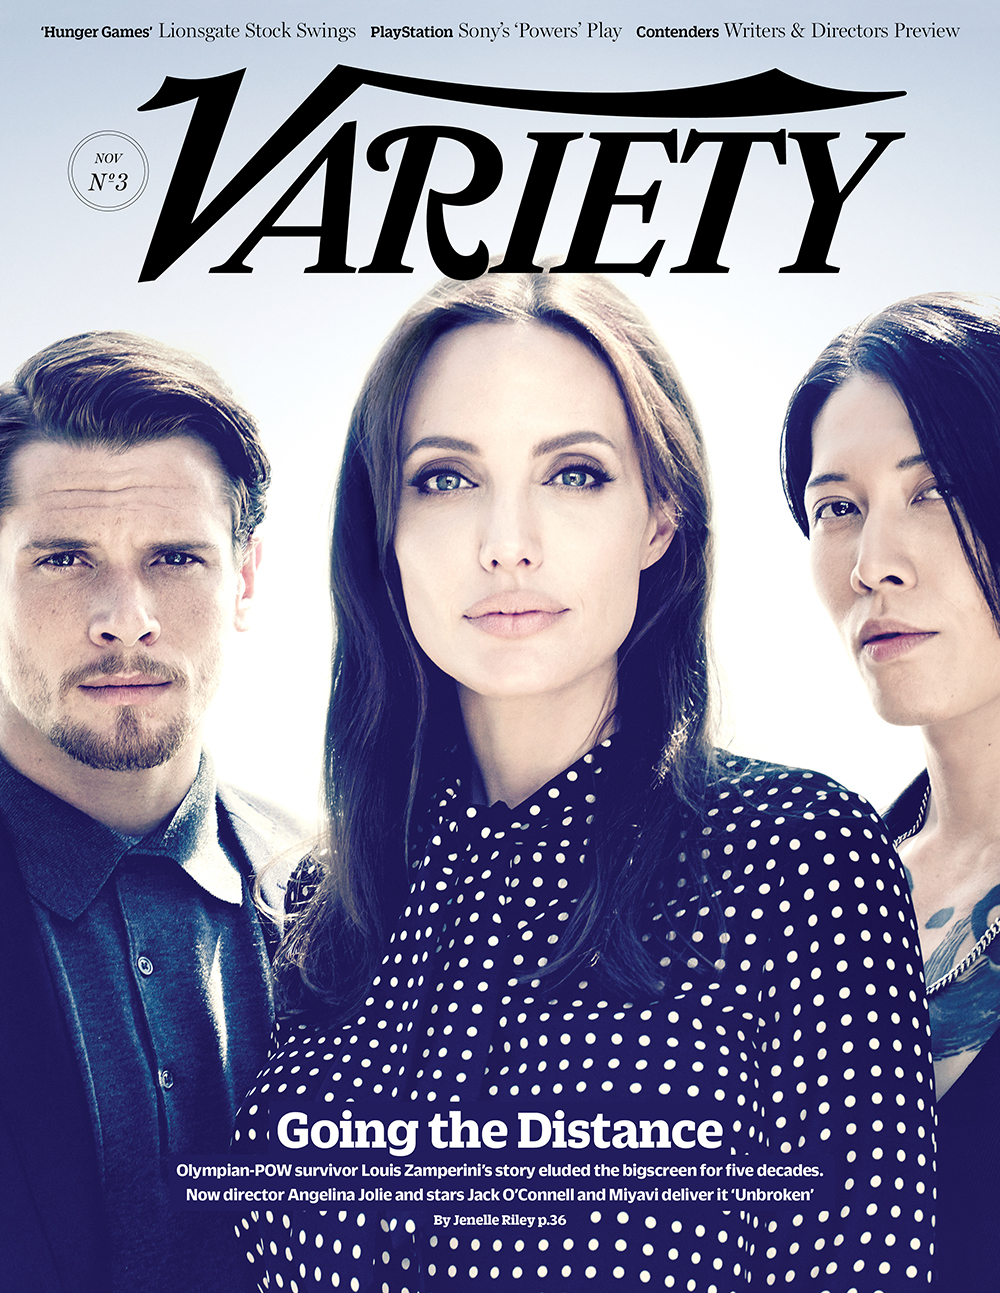 Angelina Jolie, Jack O'Connell & Miyavi Cover Variety for 'Unbroken' Feature